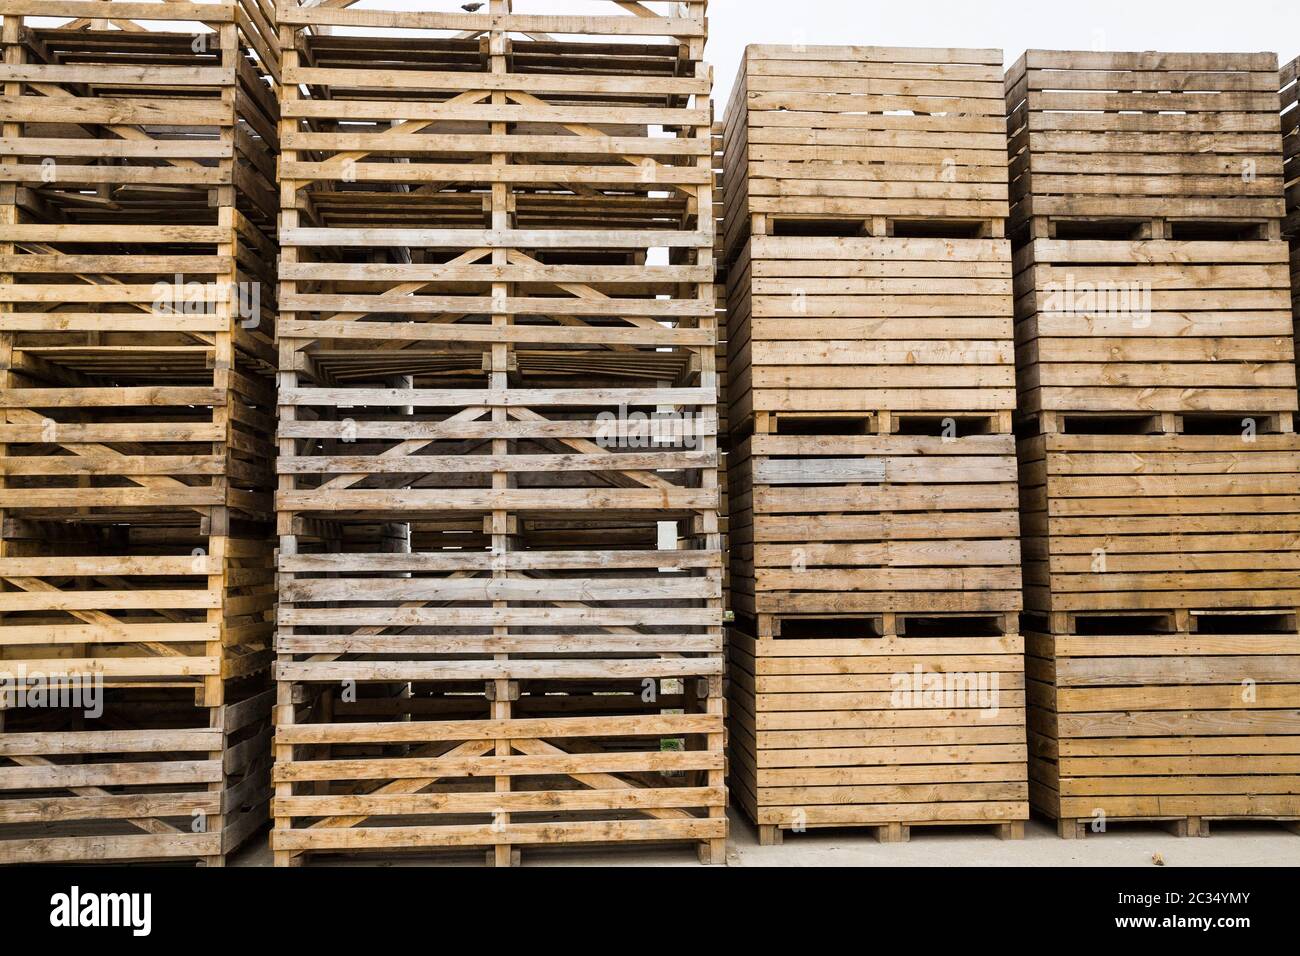 https://c8.alamy.com/comp/2C34YMY/old-wooden-boxes-for-storing-vegetables-and-fruit-harvest-after-harvest-storage-facilities-on-the-farm-cloudy-weather-2C34YMY.jpg